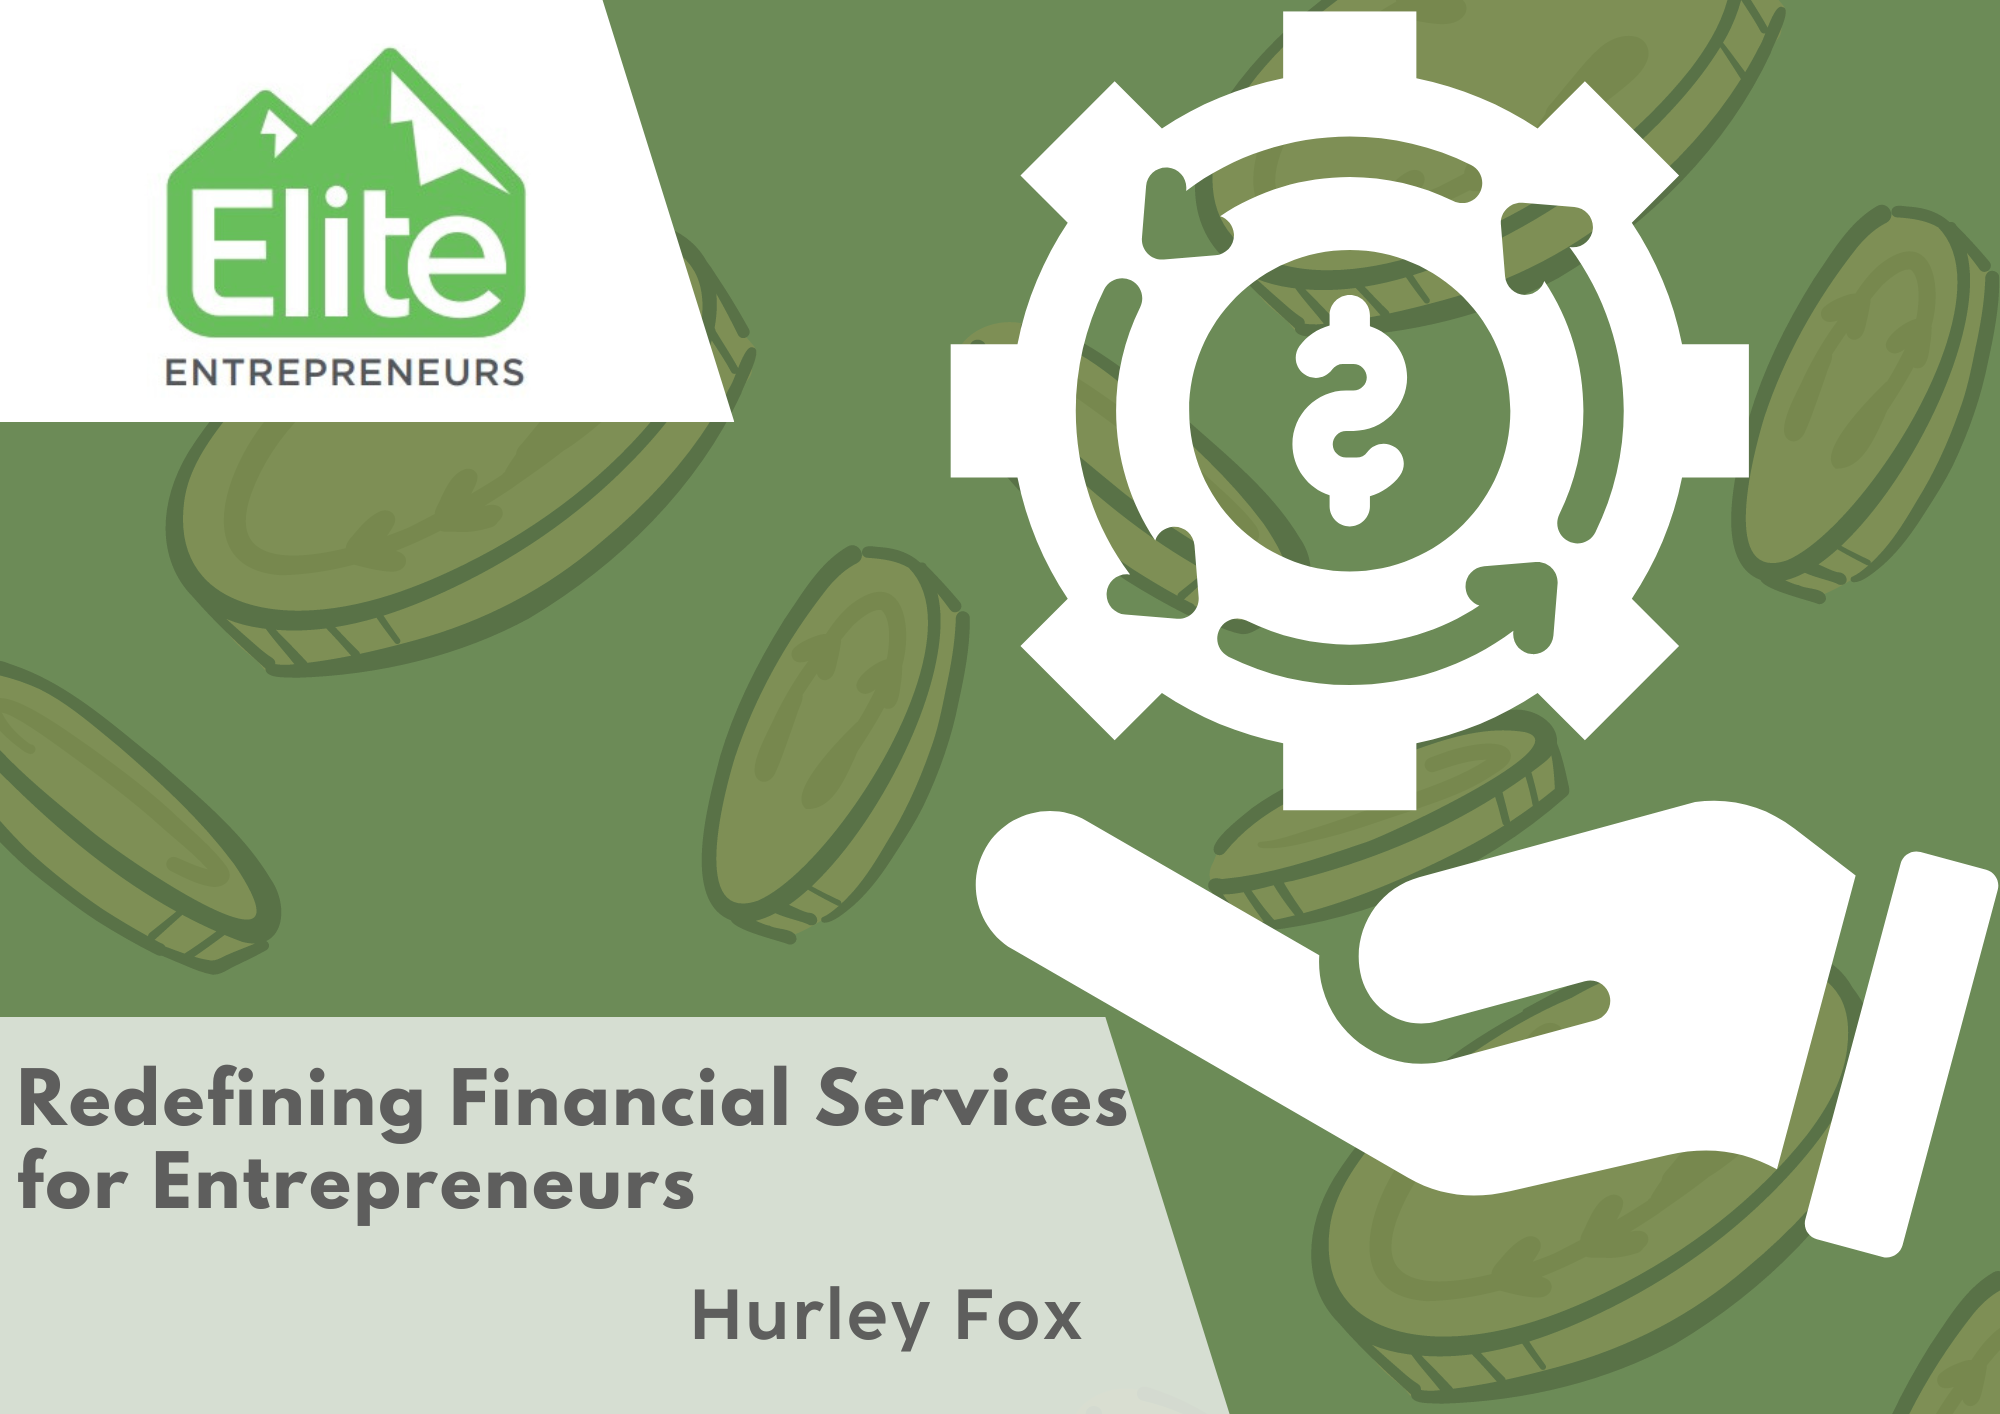 How Hurley Fox is Redefining Financial Services for Entrepreneurs